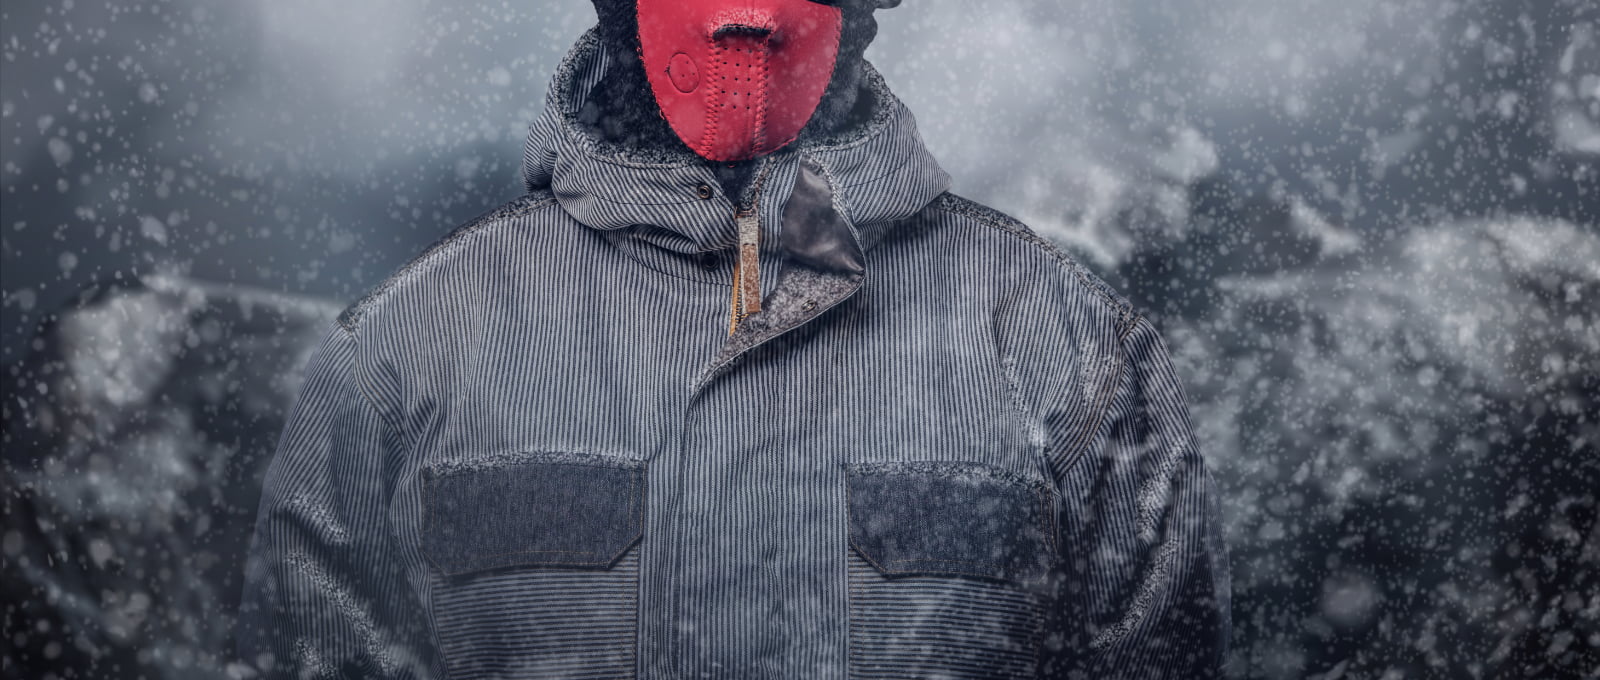 Portrait of a snowboarder dressed in a full protective gear